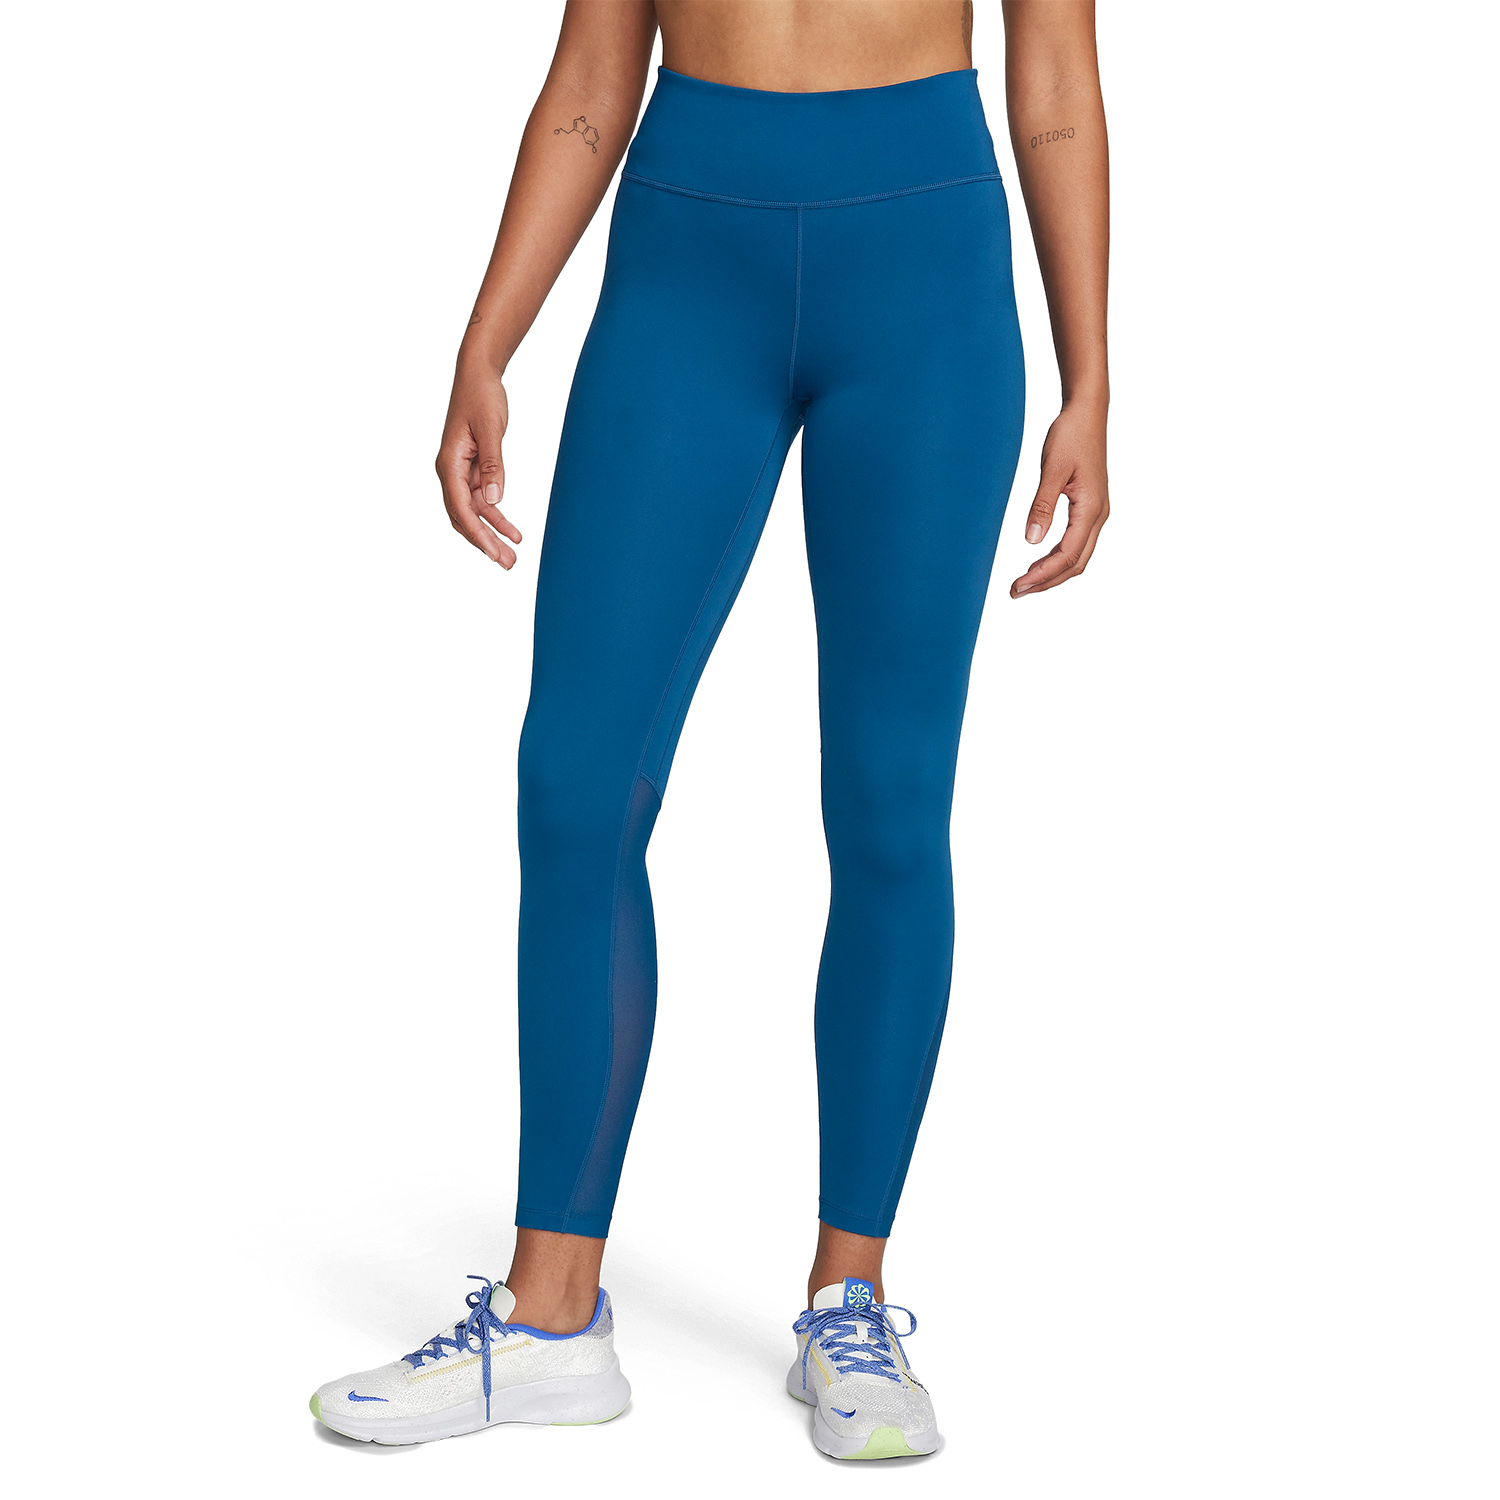 Nike One Mid Rise 7/8 Women's Training Tights - Court Blue/White